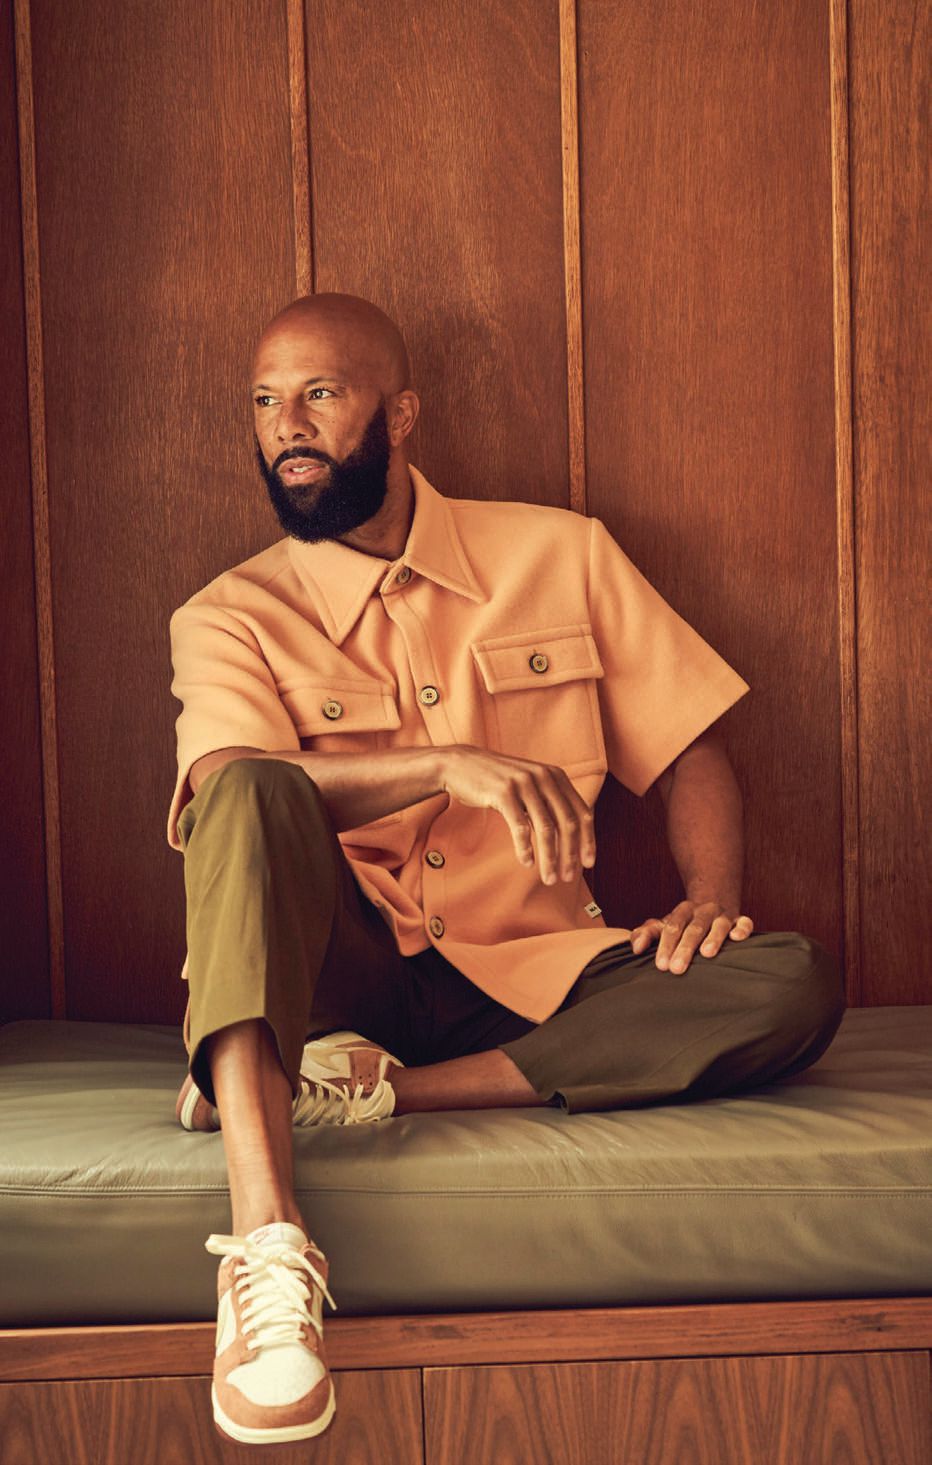 Catch Oscar, Emmy and Grammy winner Common at The Rady Shell July 3. PHOTO: BY BRIAN BOWEN SMITH